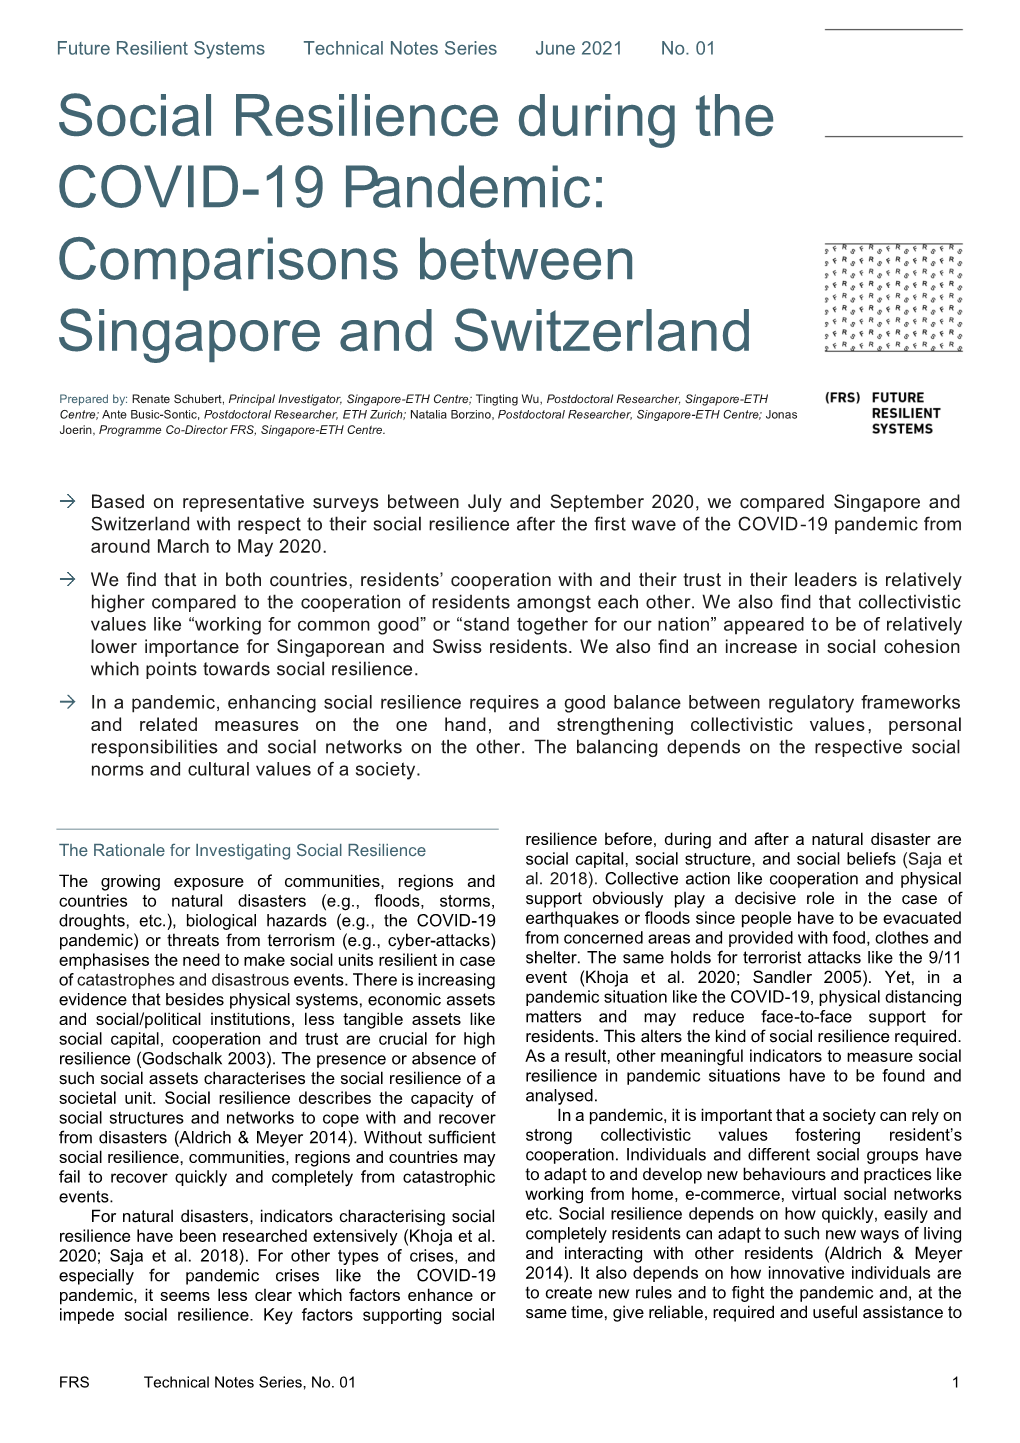 Social Resilience During the COVID-19 Pandemic: Comparisons Between Singapore and Switzerland (Title on Max. 4 Lines)